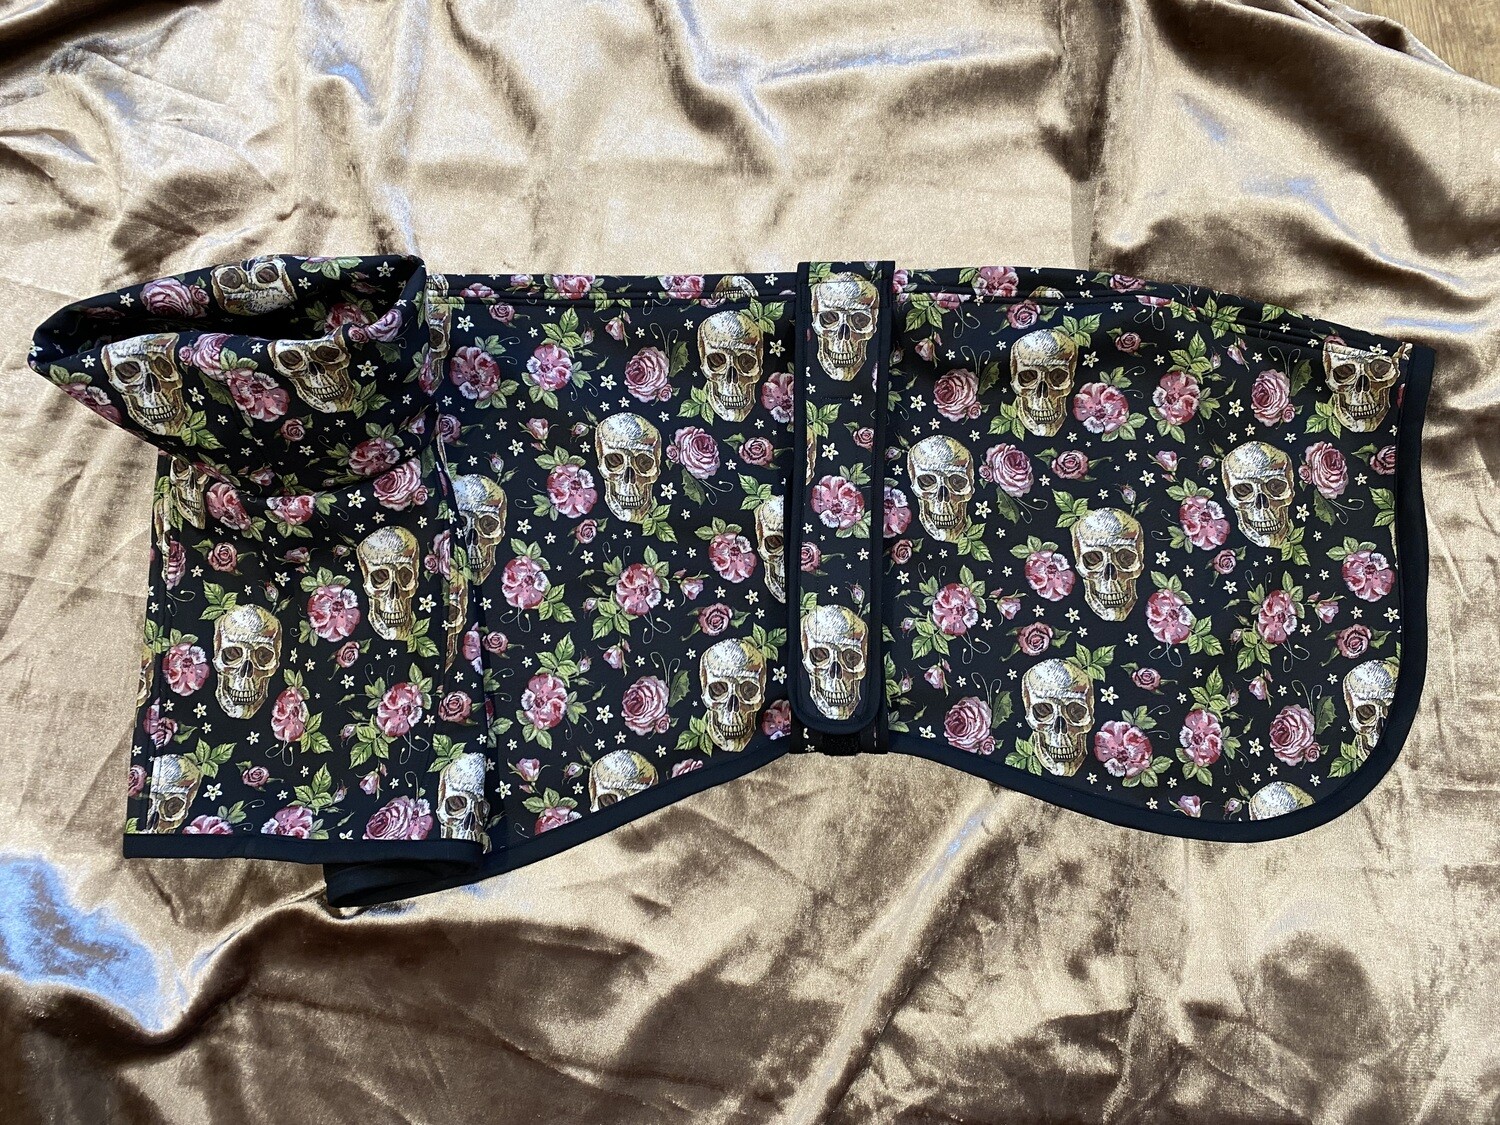 24" Skulls and Roses Print Fleece Lined Raincoat - CUT OUT AND READY TO SEW!